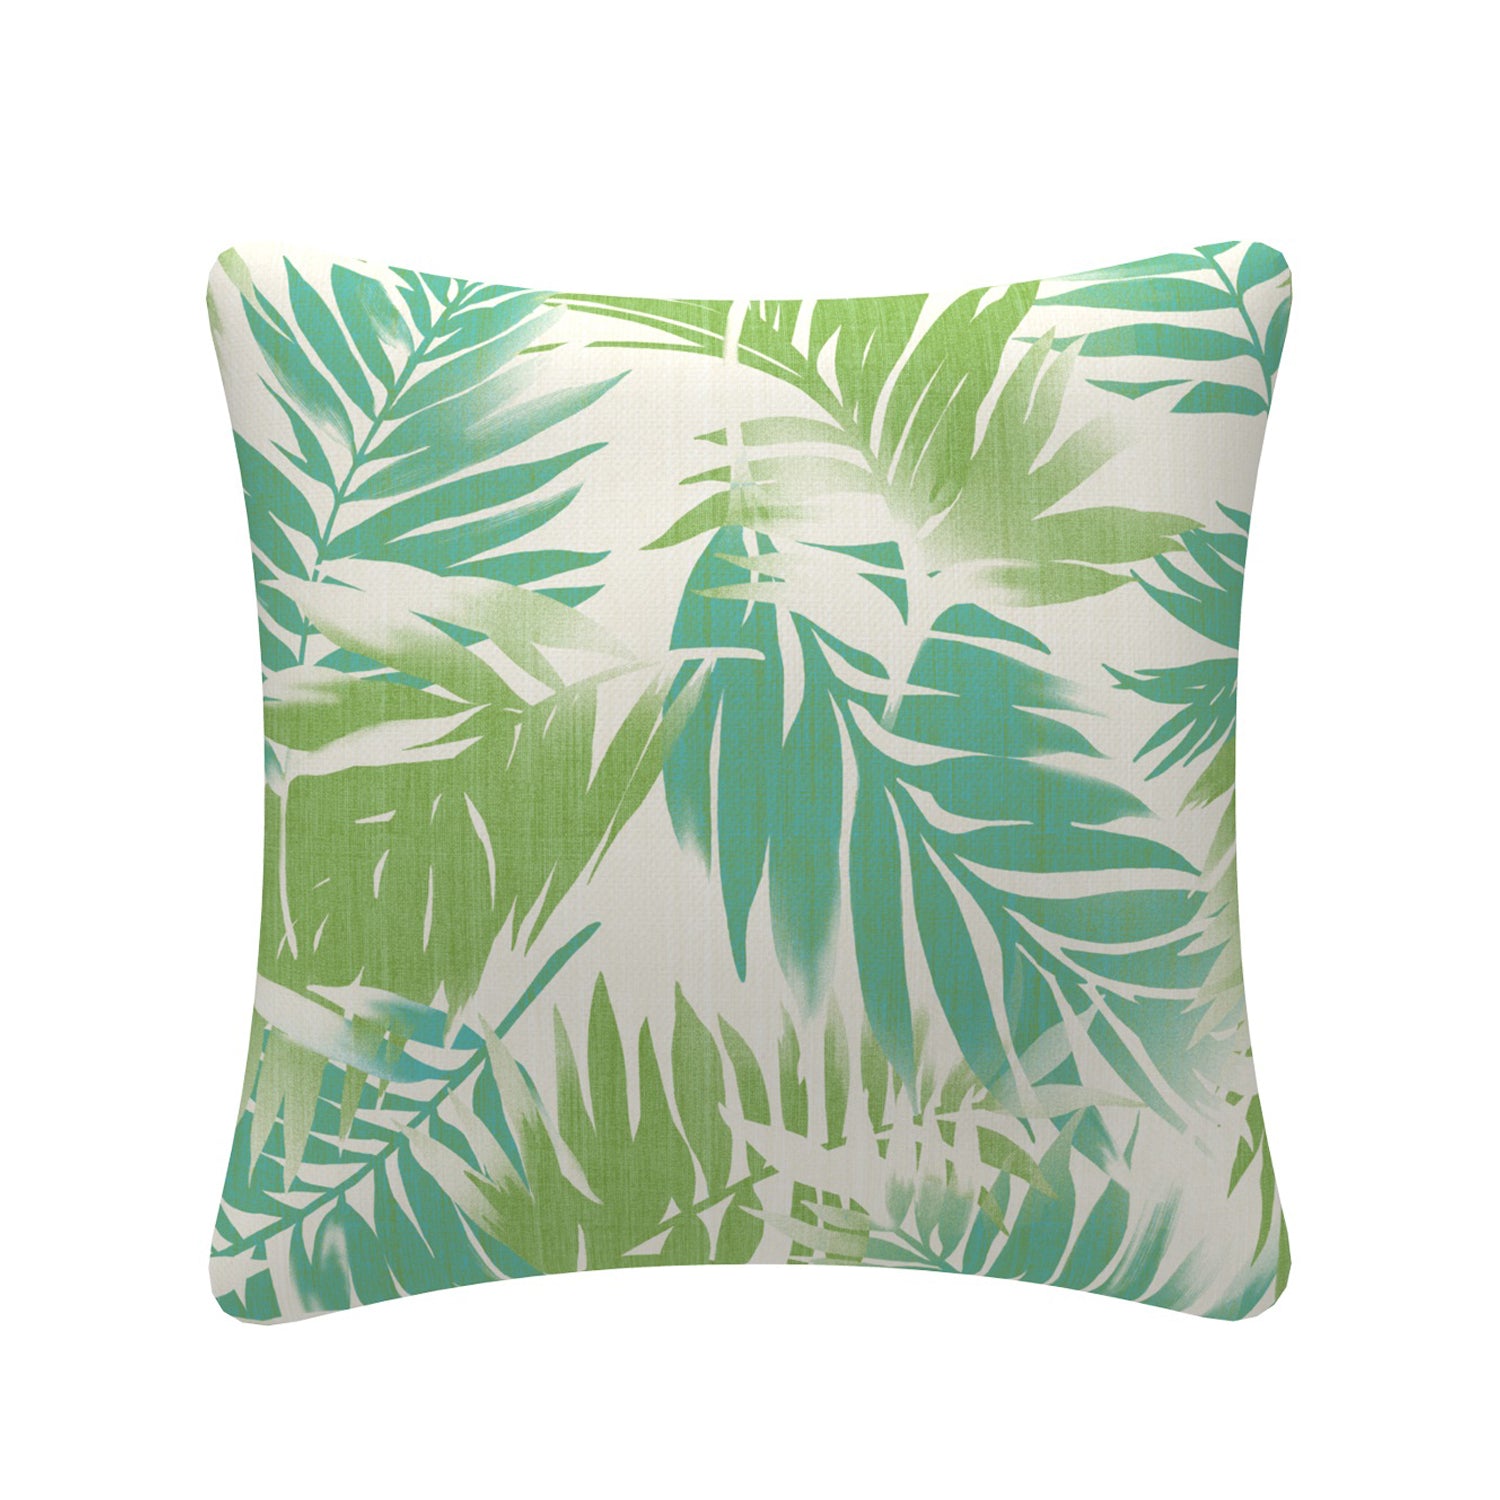 Outdoor Pillows with Insert Green Leaves Patio Accent Throw Pillows 18x18 inch Square Decorative Pillows